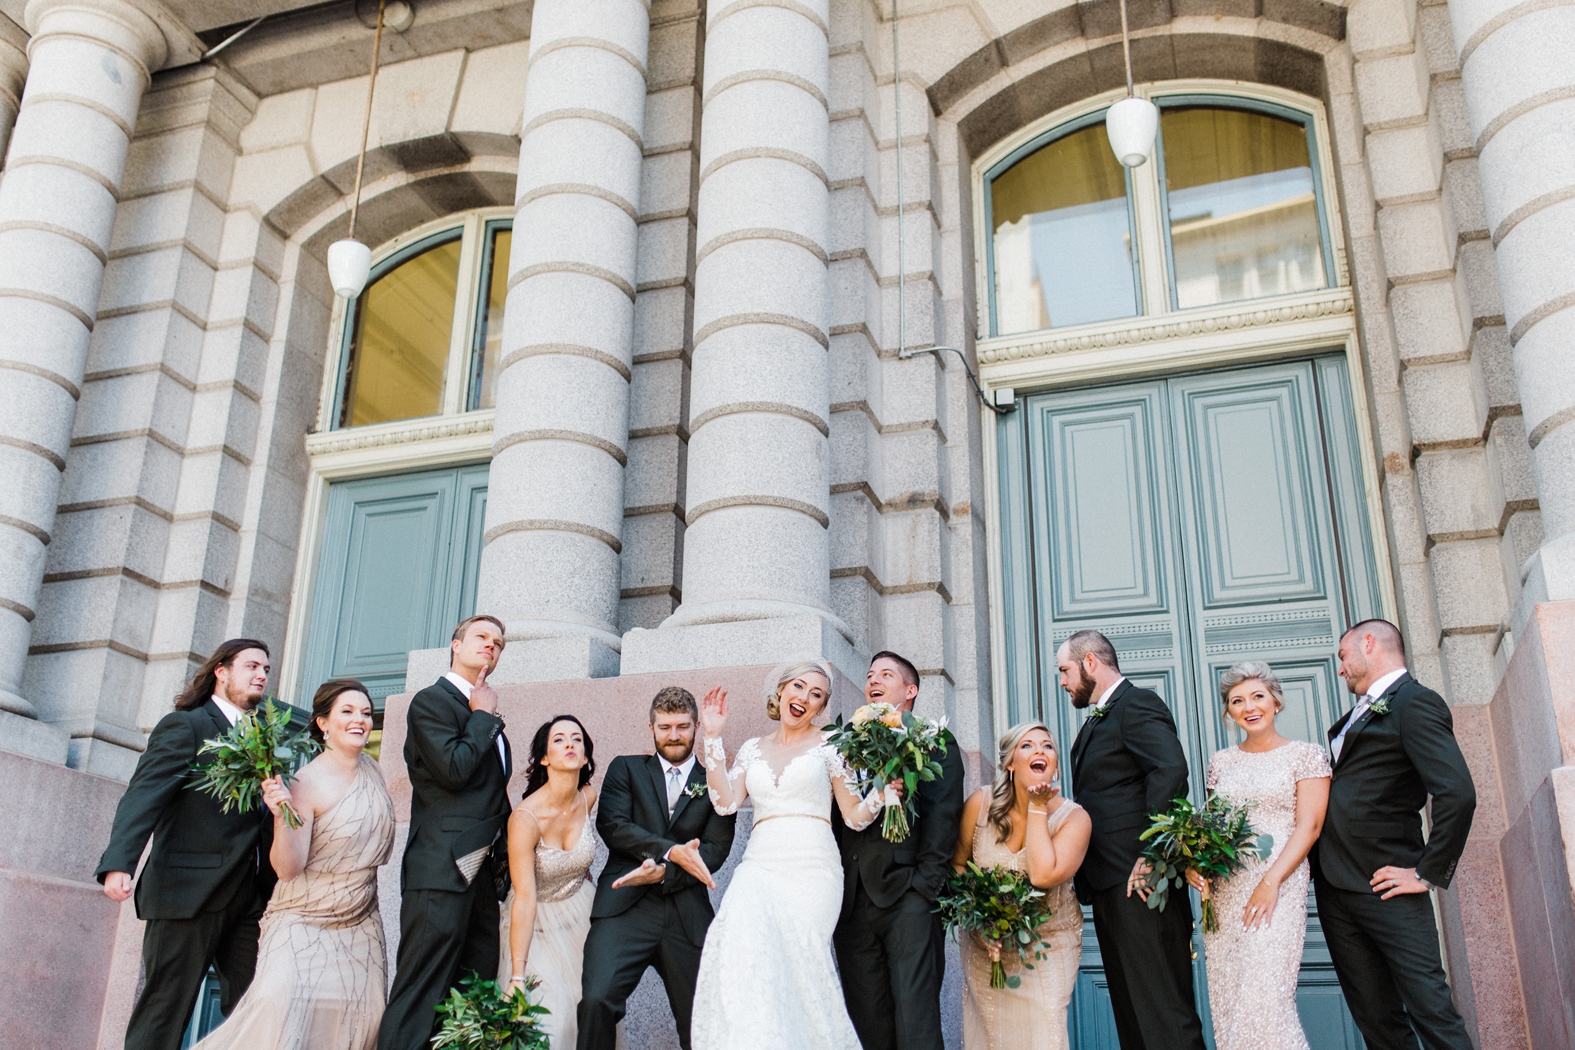 Wedding party silly photo. Groomsmen in olive green suits with light gray ties and brown shoes. Bridesmaids in peach, blush, neutral sequined and beaded bridesmaid dresses. Bride in lace long sleeve wedding gown with birdcage veil. Greenery and peach bouquets.